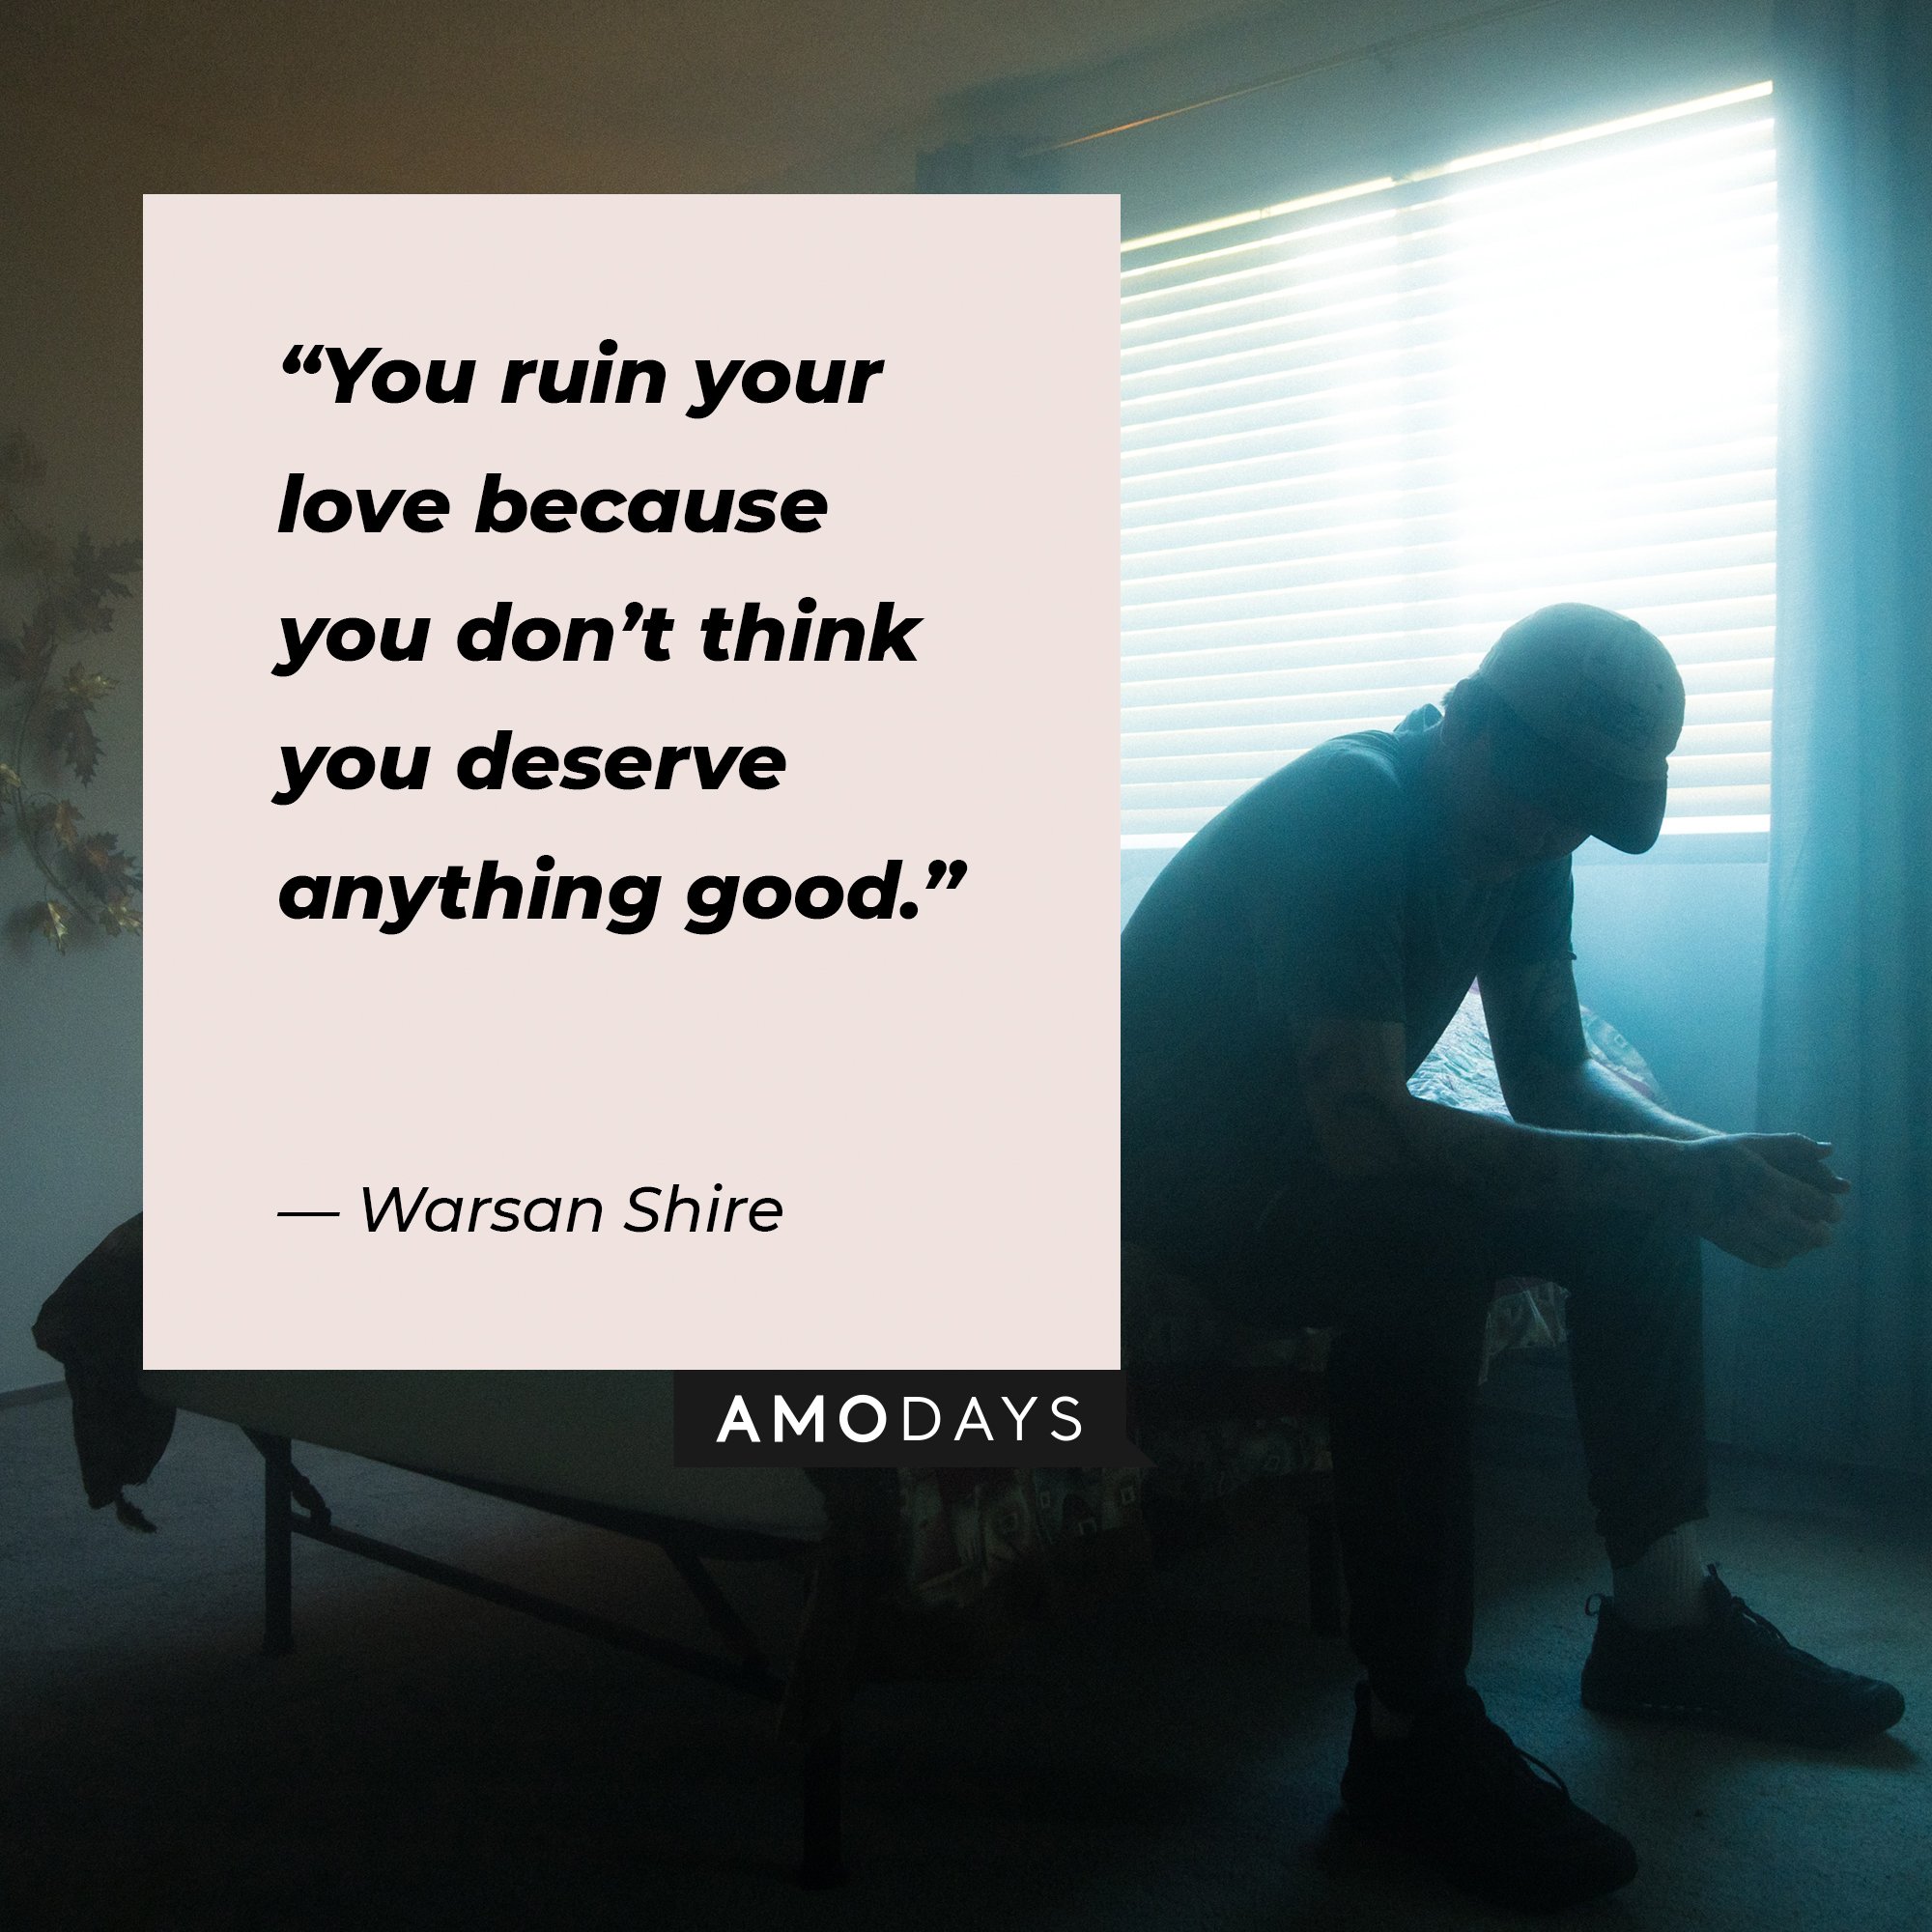 Warsan Shire’s quote:“You ruin your love because you don’t think you deserve anything good.” | Image: AmoDays